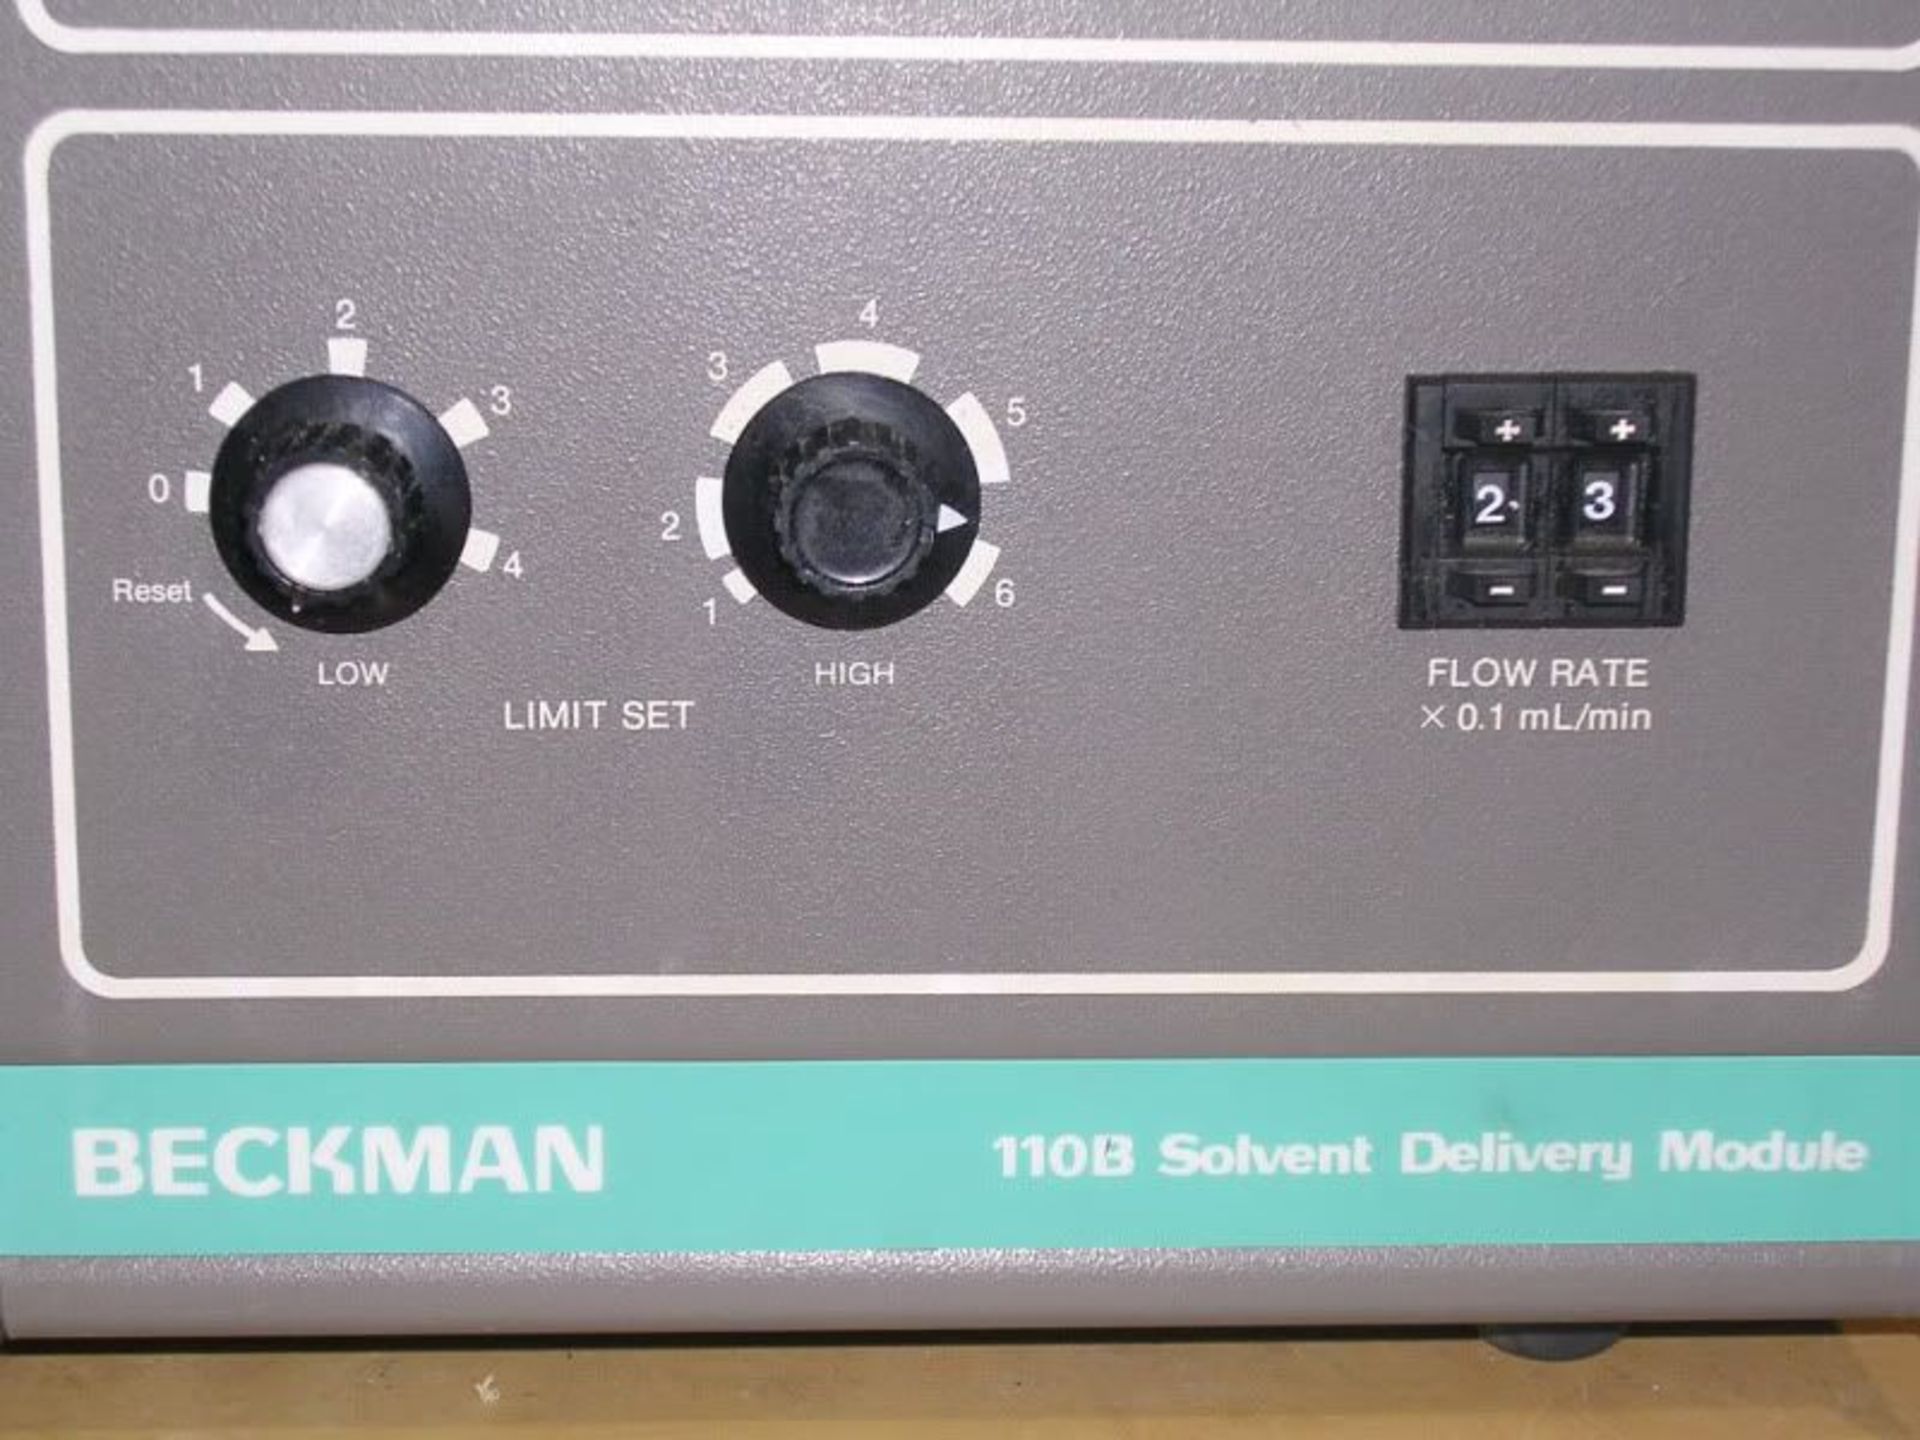 Beckman 110B Solvent Delivery Module, Qty 1, 331261977473 - Image 3 of 7